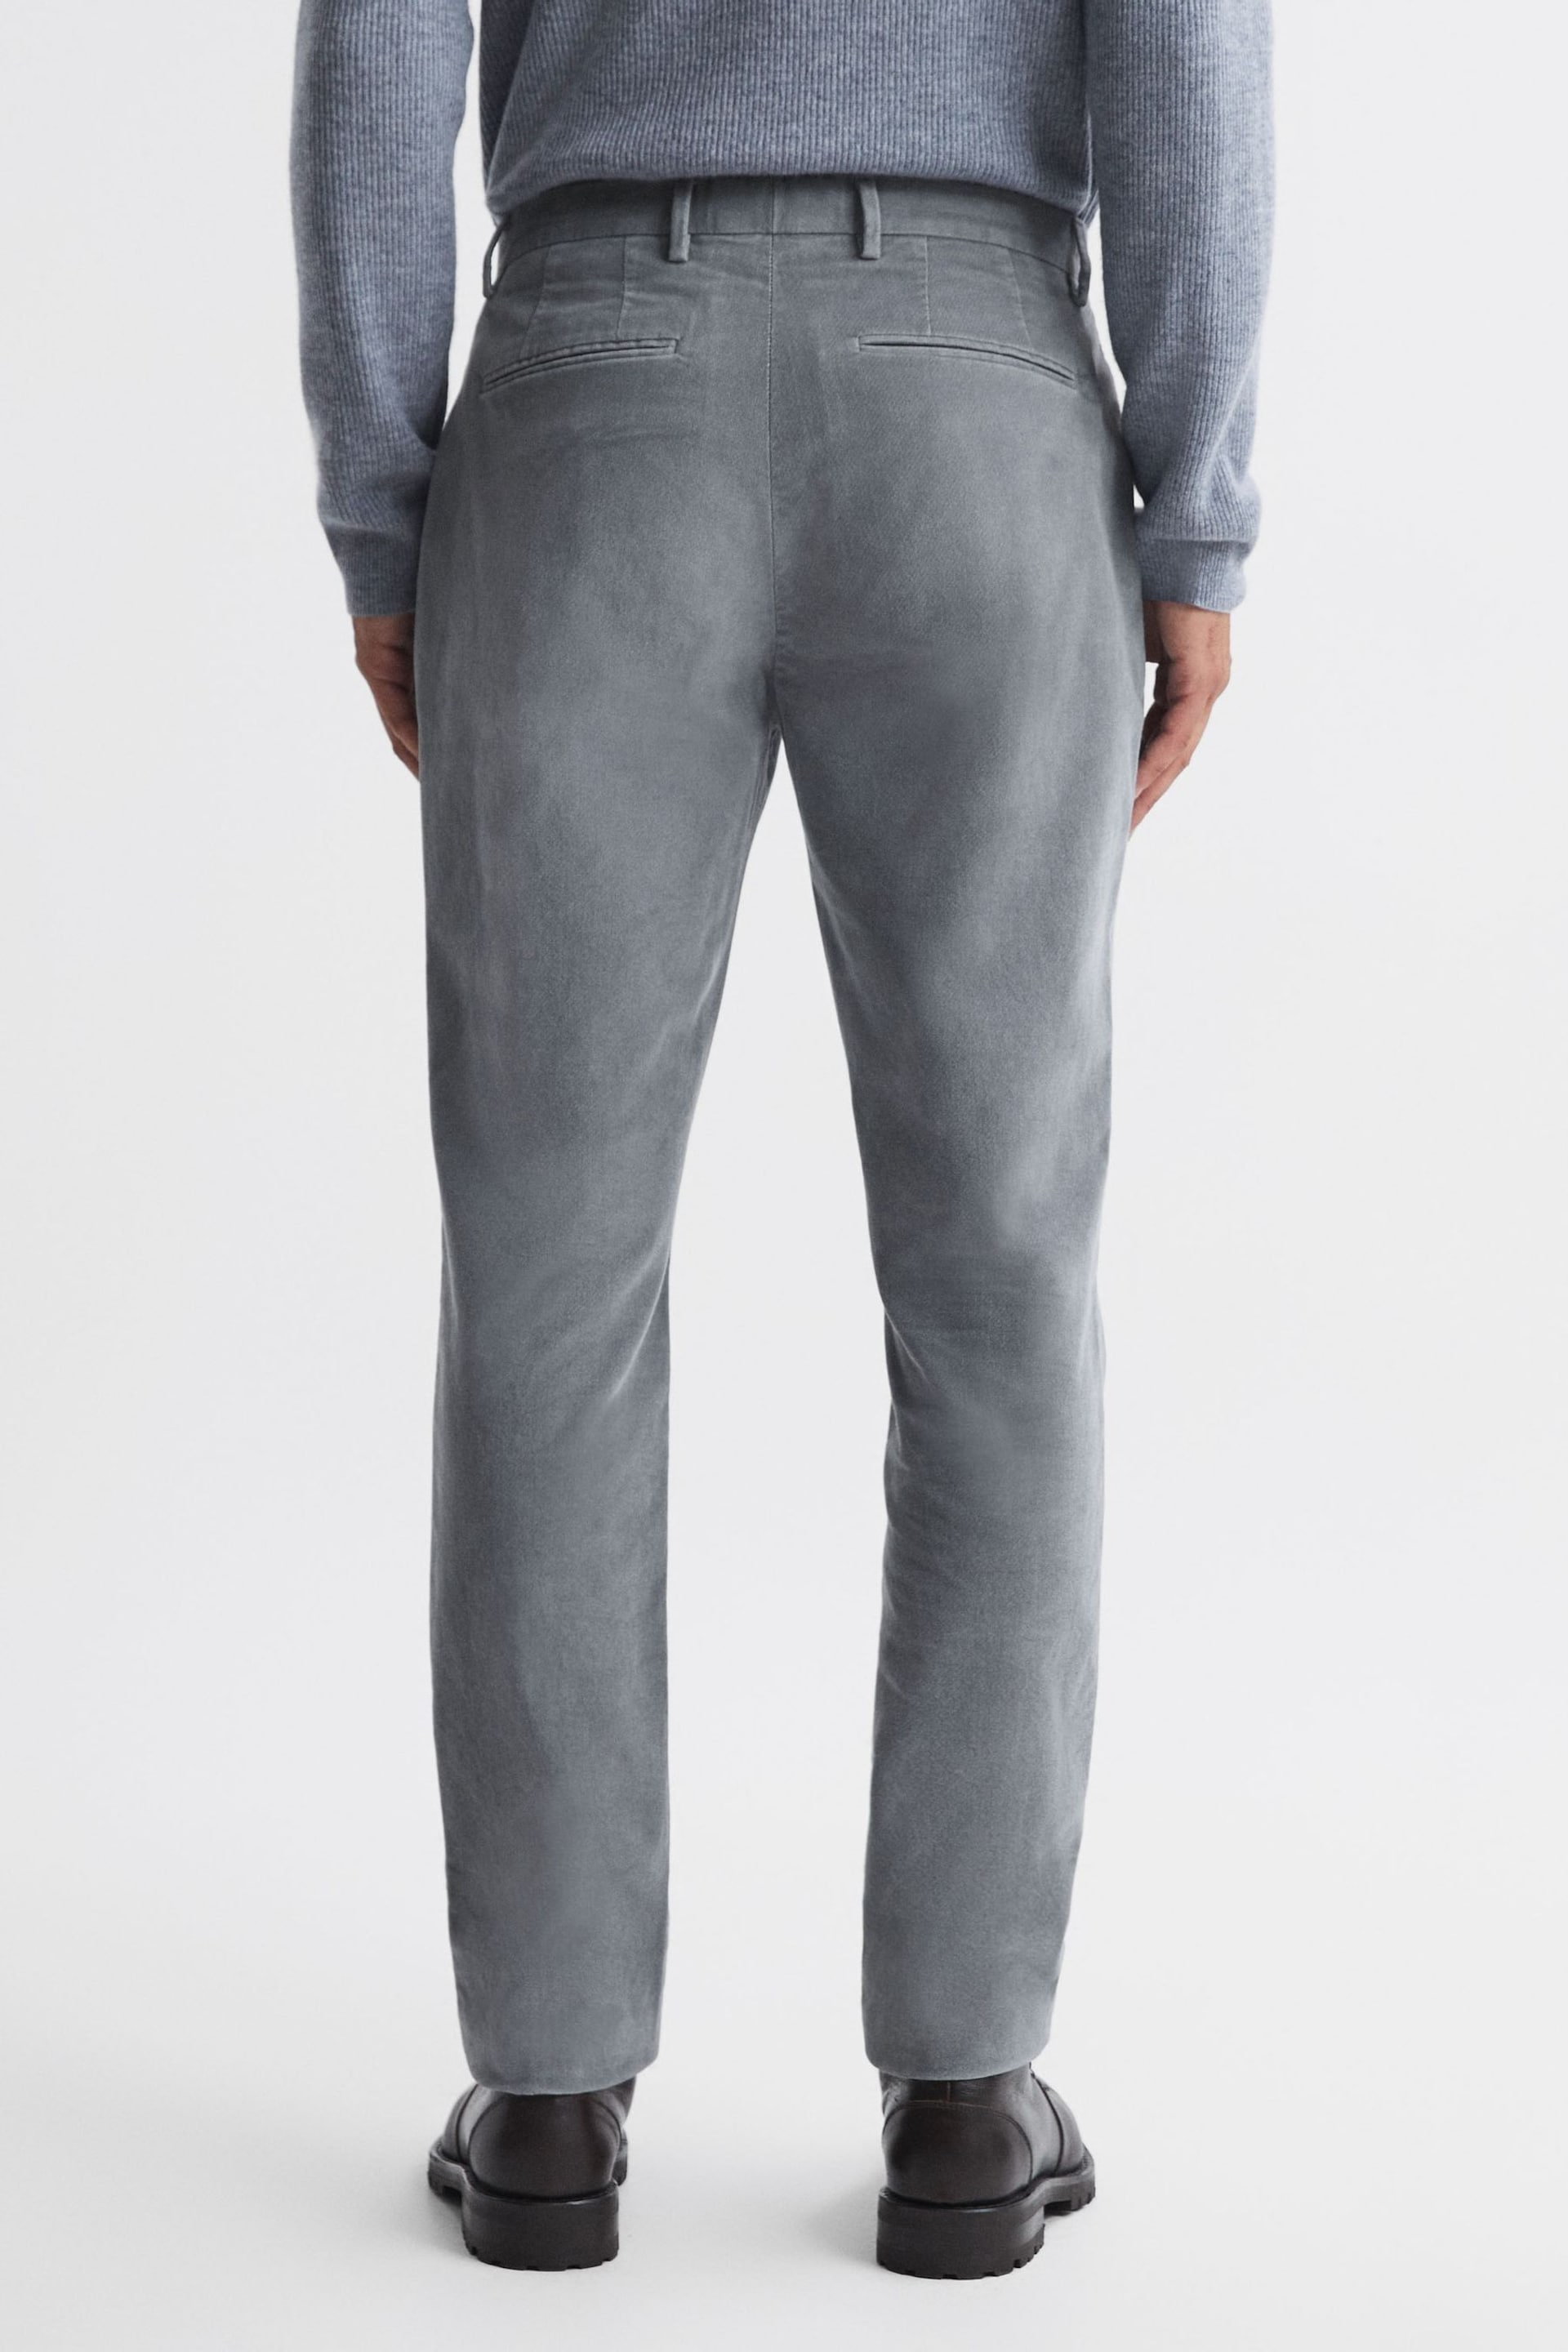 Reiss Grey Strike Slim Fit Brushed Cotton Trousers - Image 4 of 4